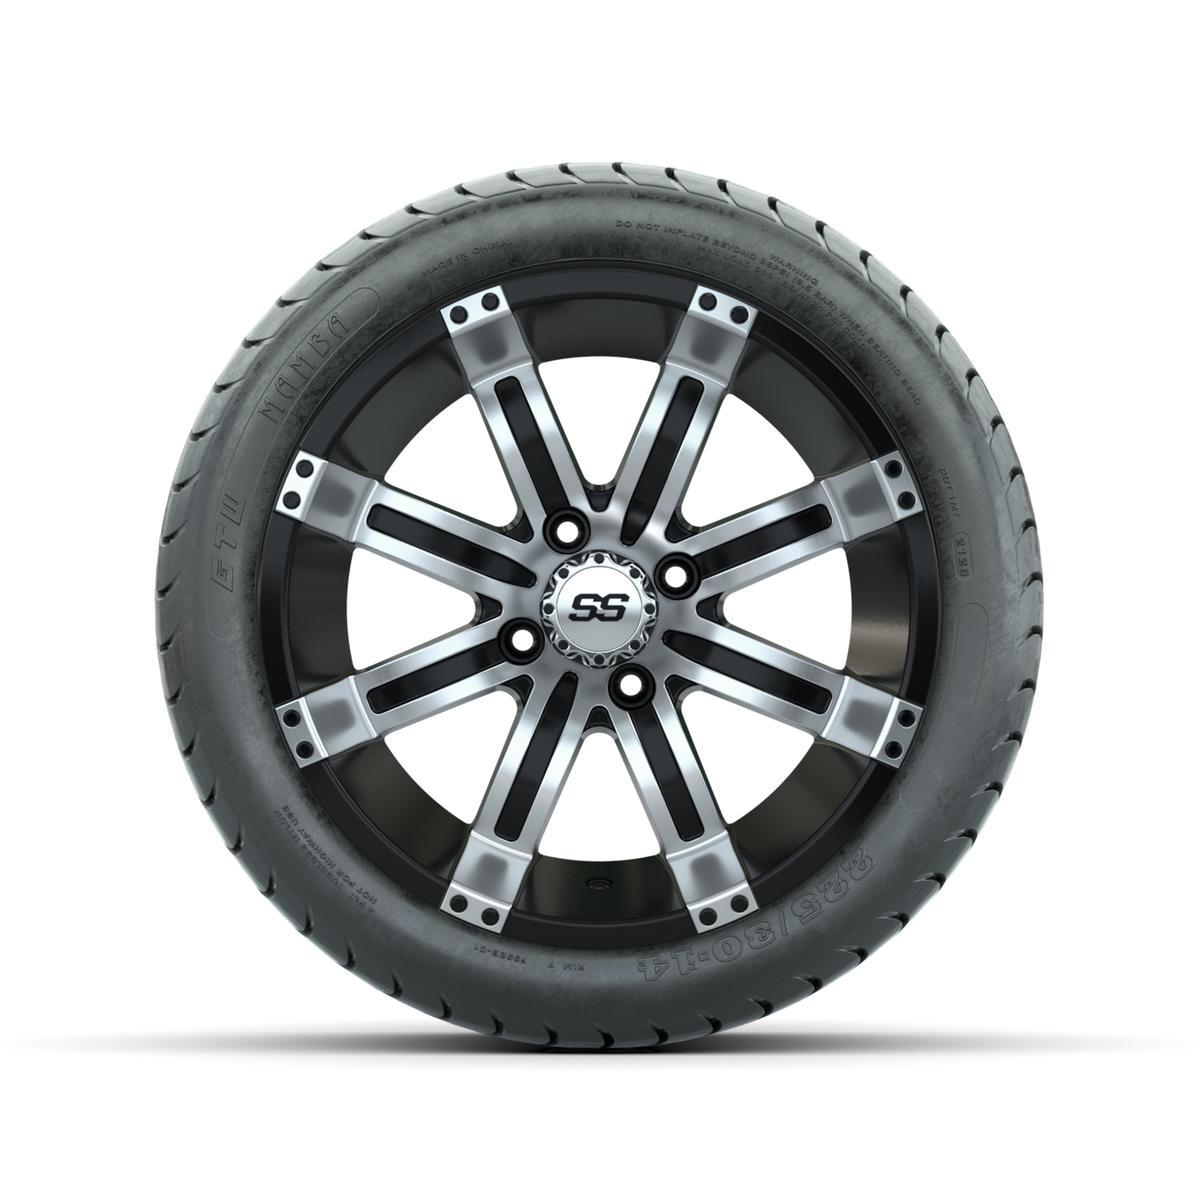 Set of (4) 14 in GTW Tempest Wheels with 225/30-14 Mamba Street Tires